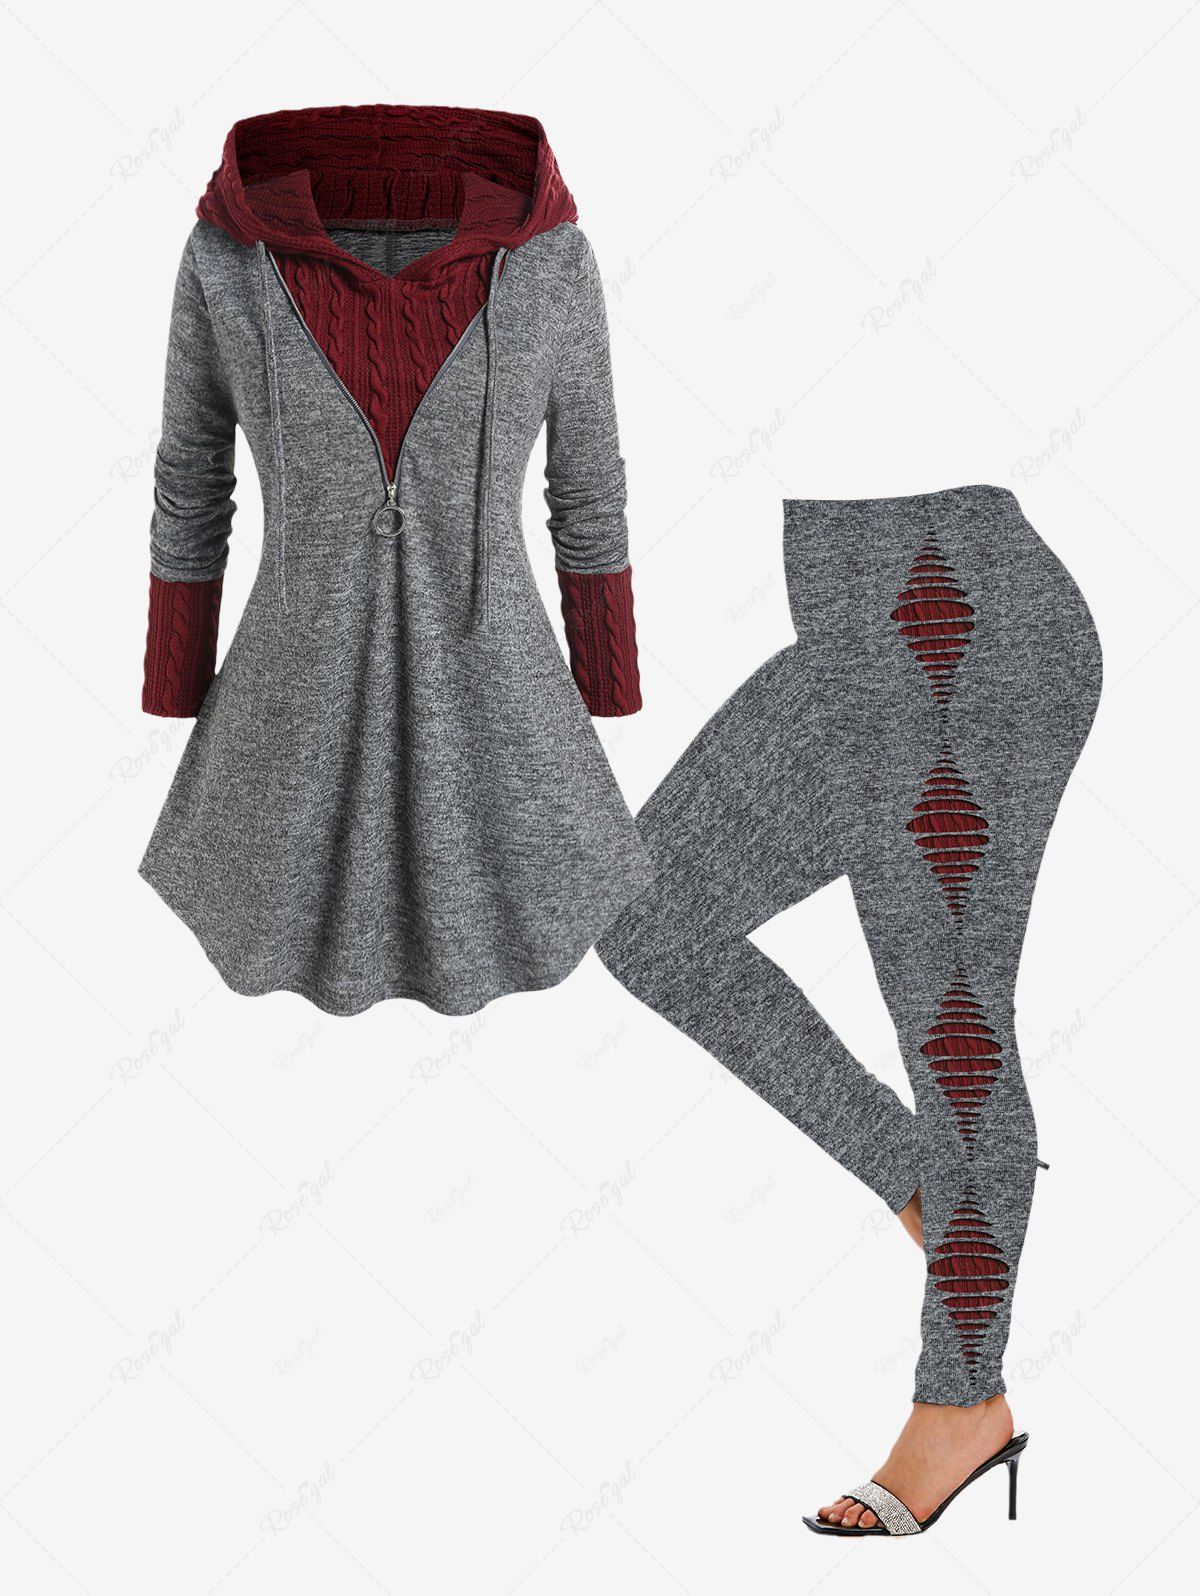 Buy Hooded Drawstring Mixed Media Top and High Waist 3D Ripped Leggings Plus Size Outfit  